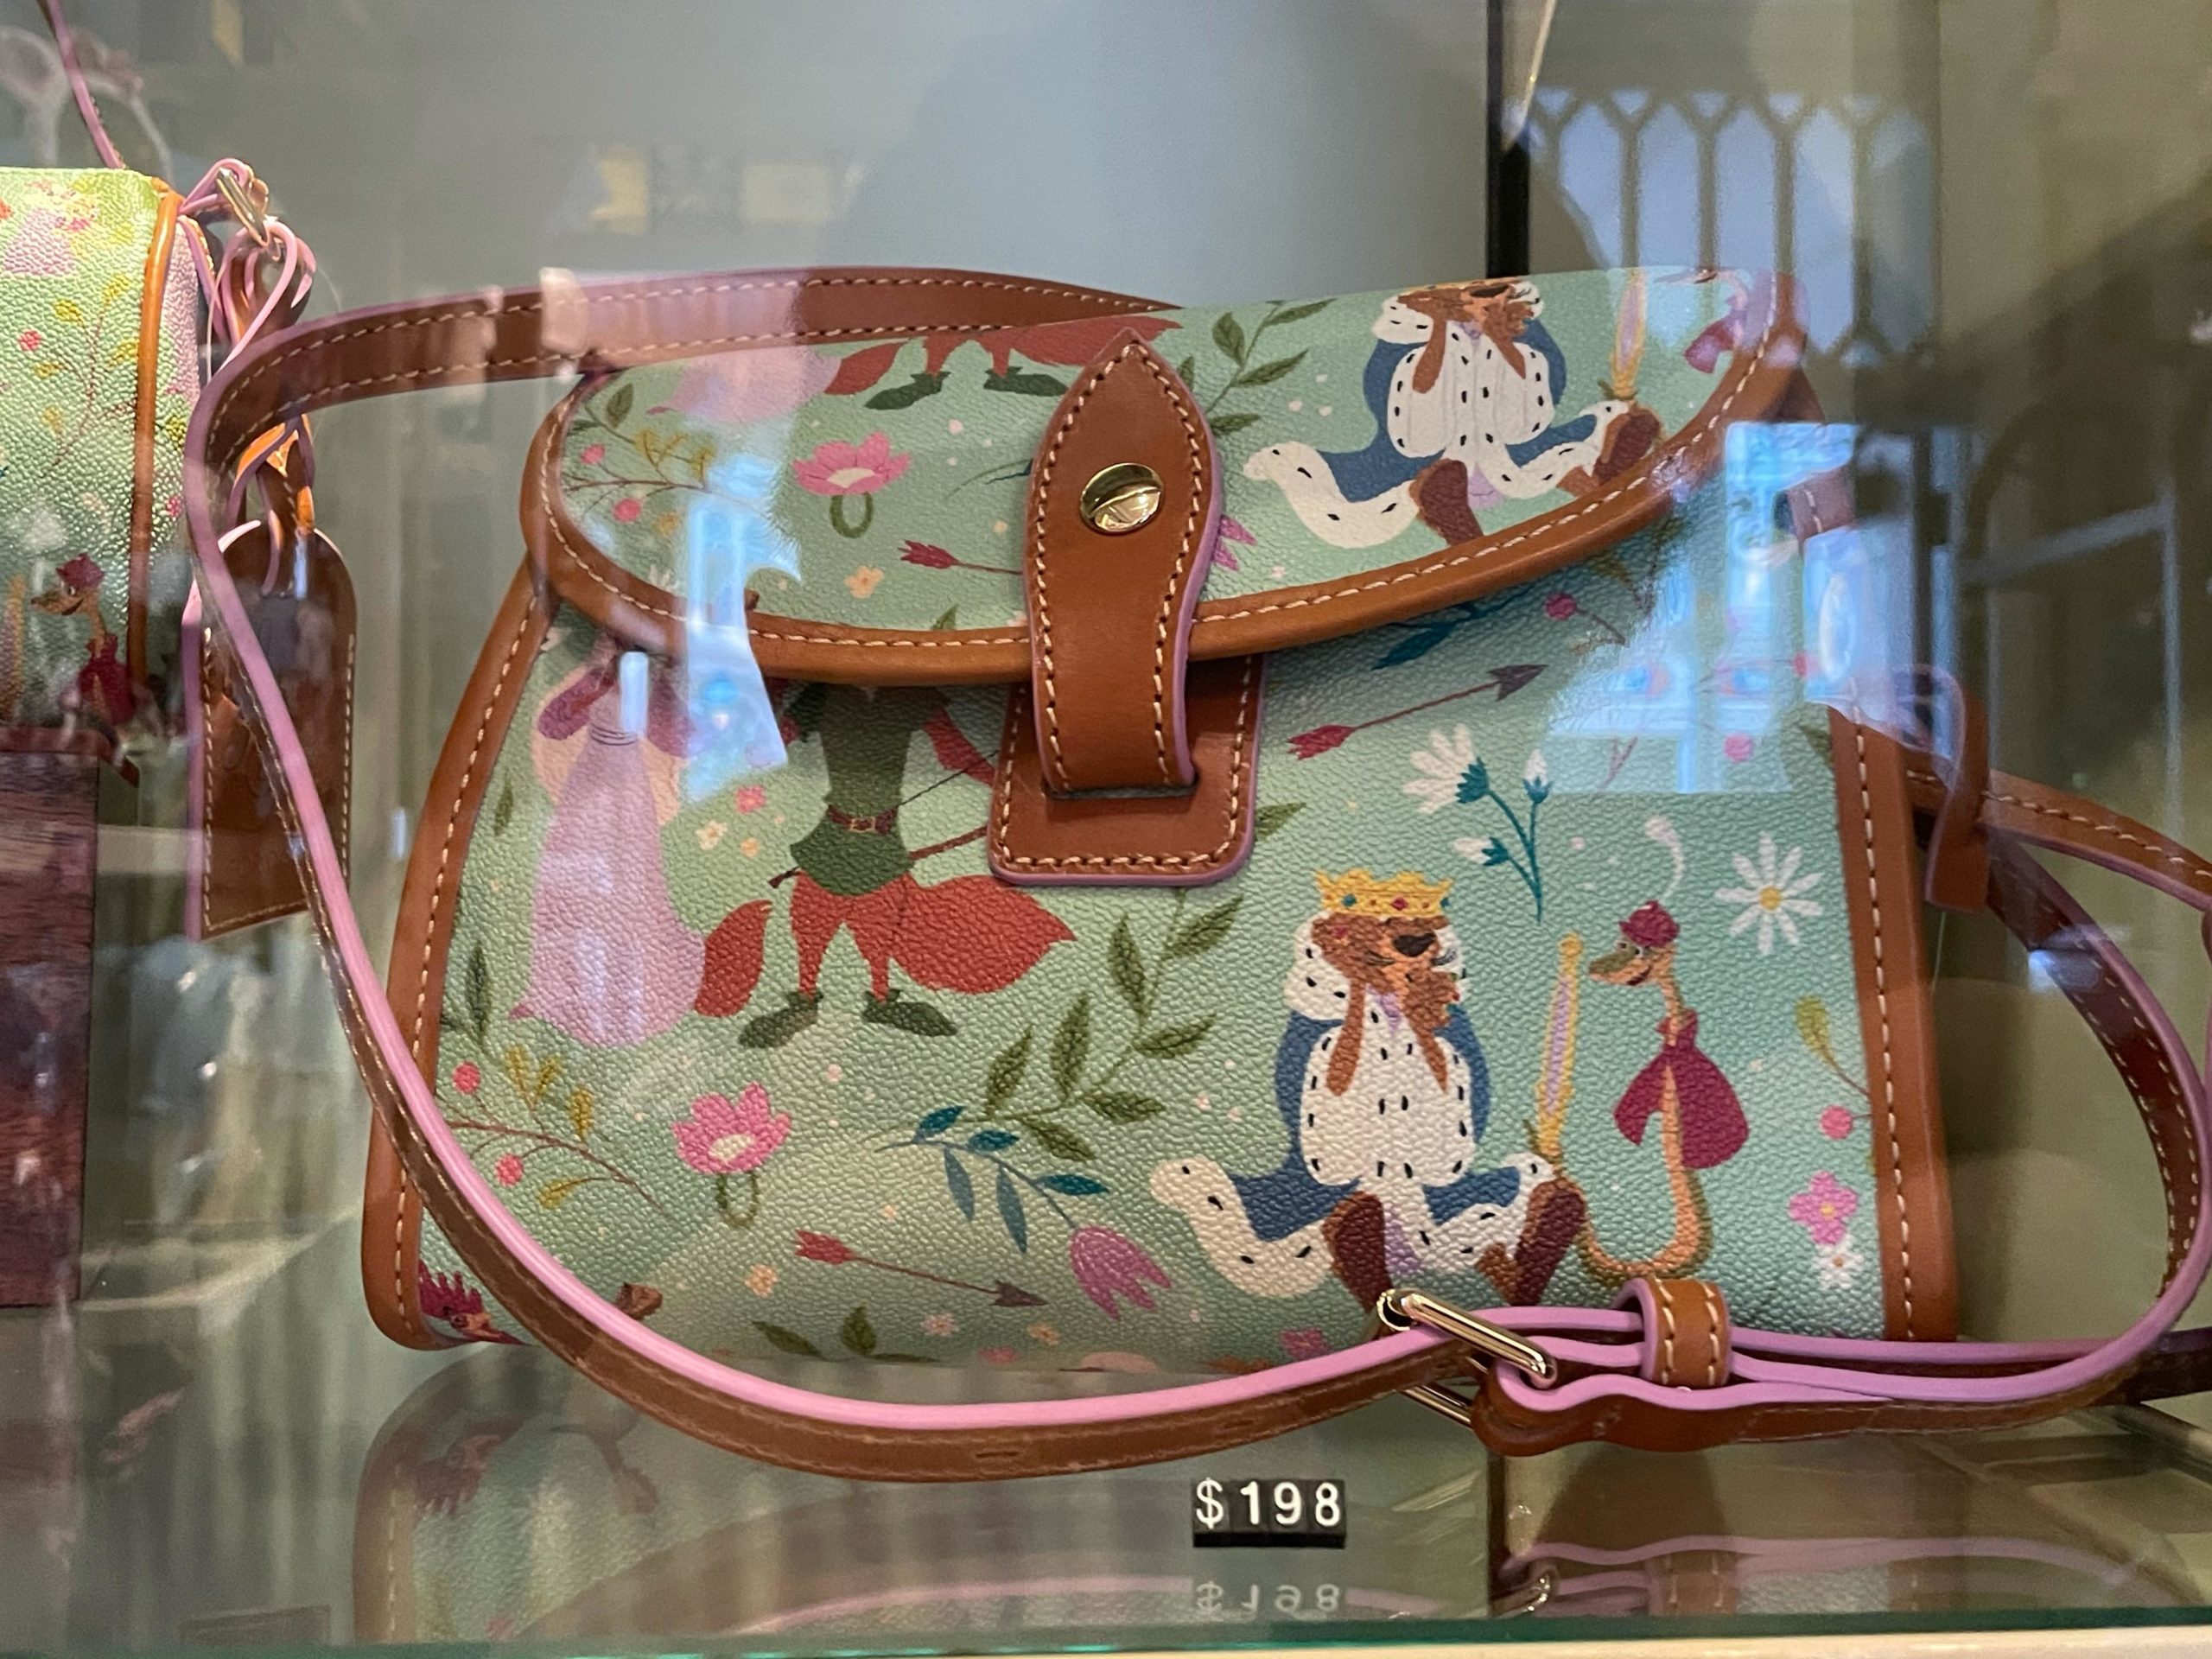 Get A First Look At The New 'Robin Hood' Dooney & Bourke Bags ...